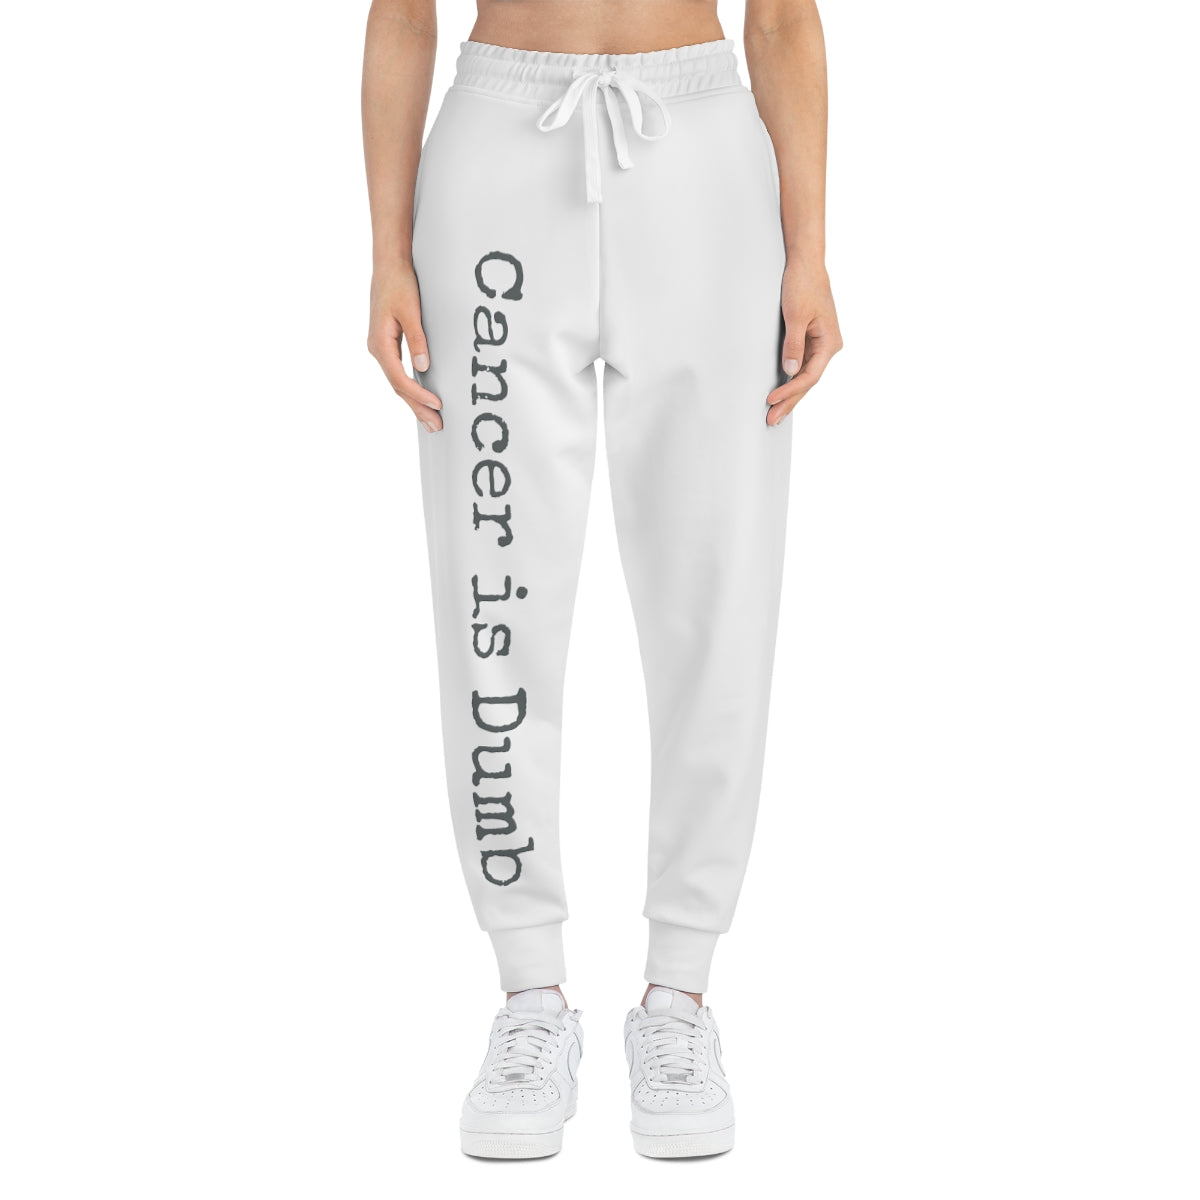 Anti Cancer Athletic Joggers Survivor Cancer is Dumb Fitness Gym Clothing